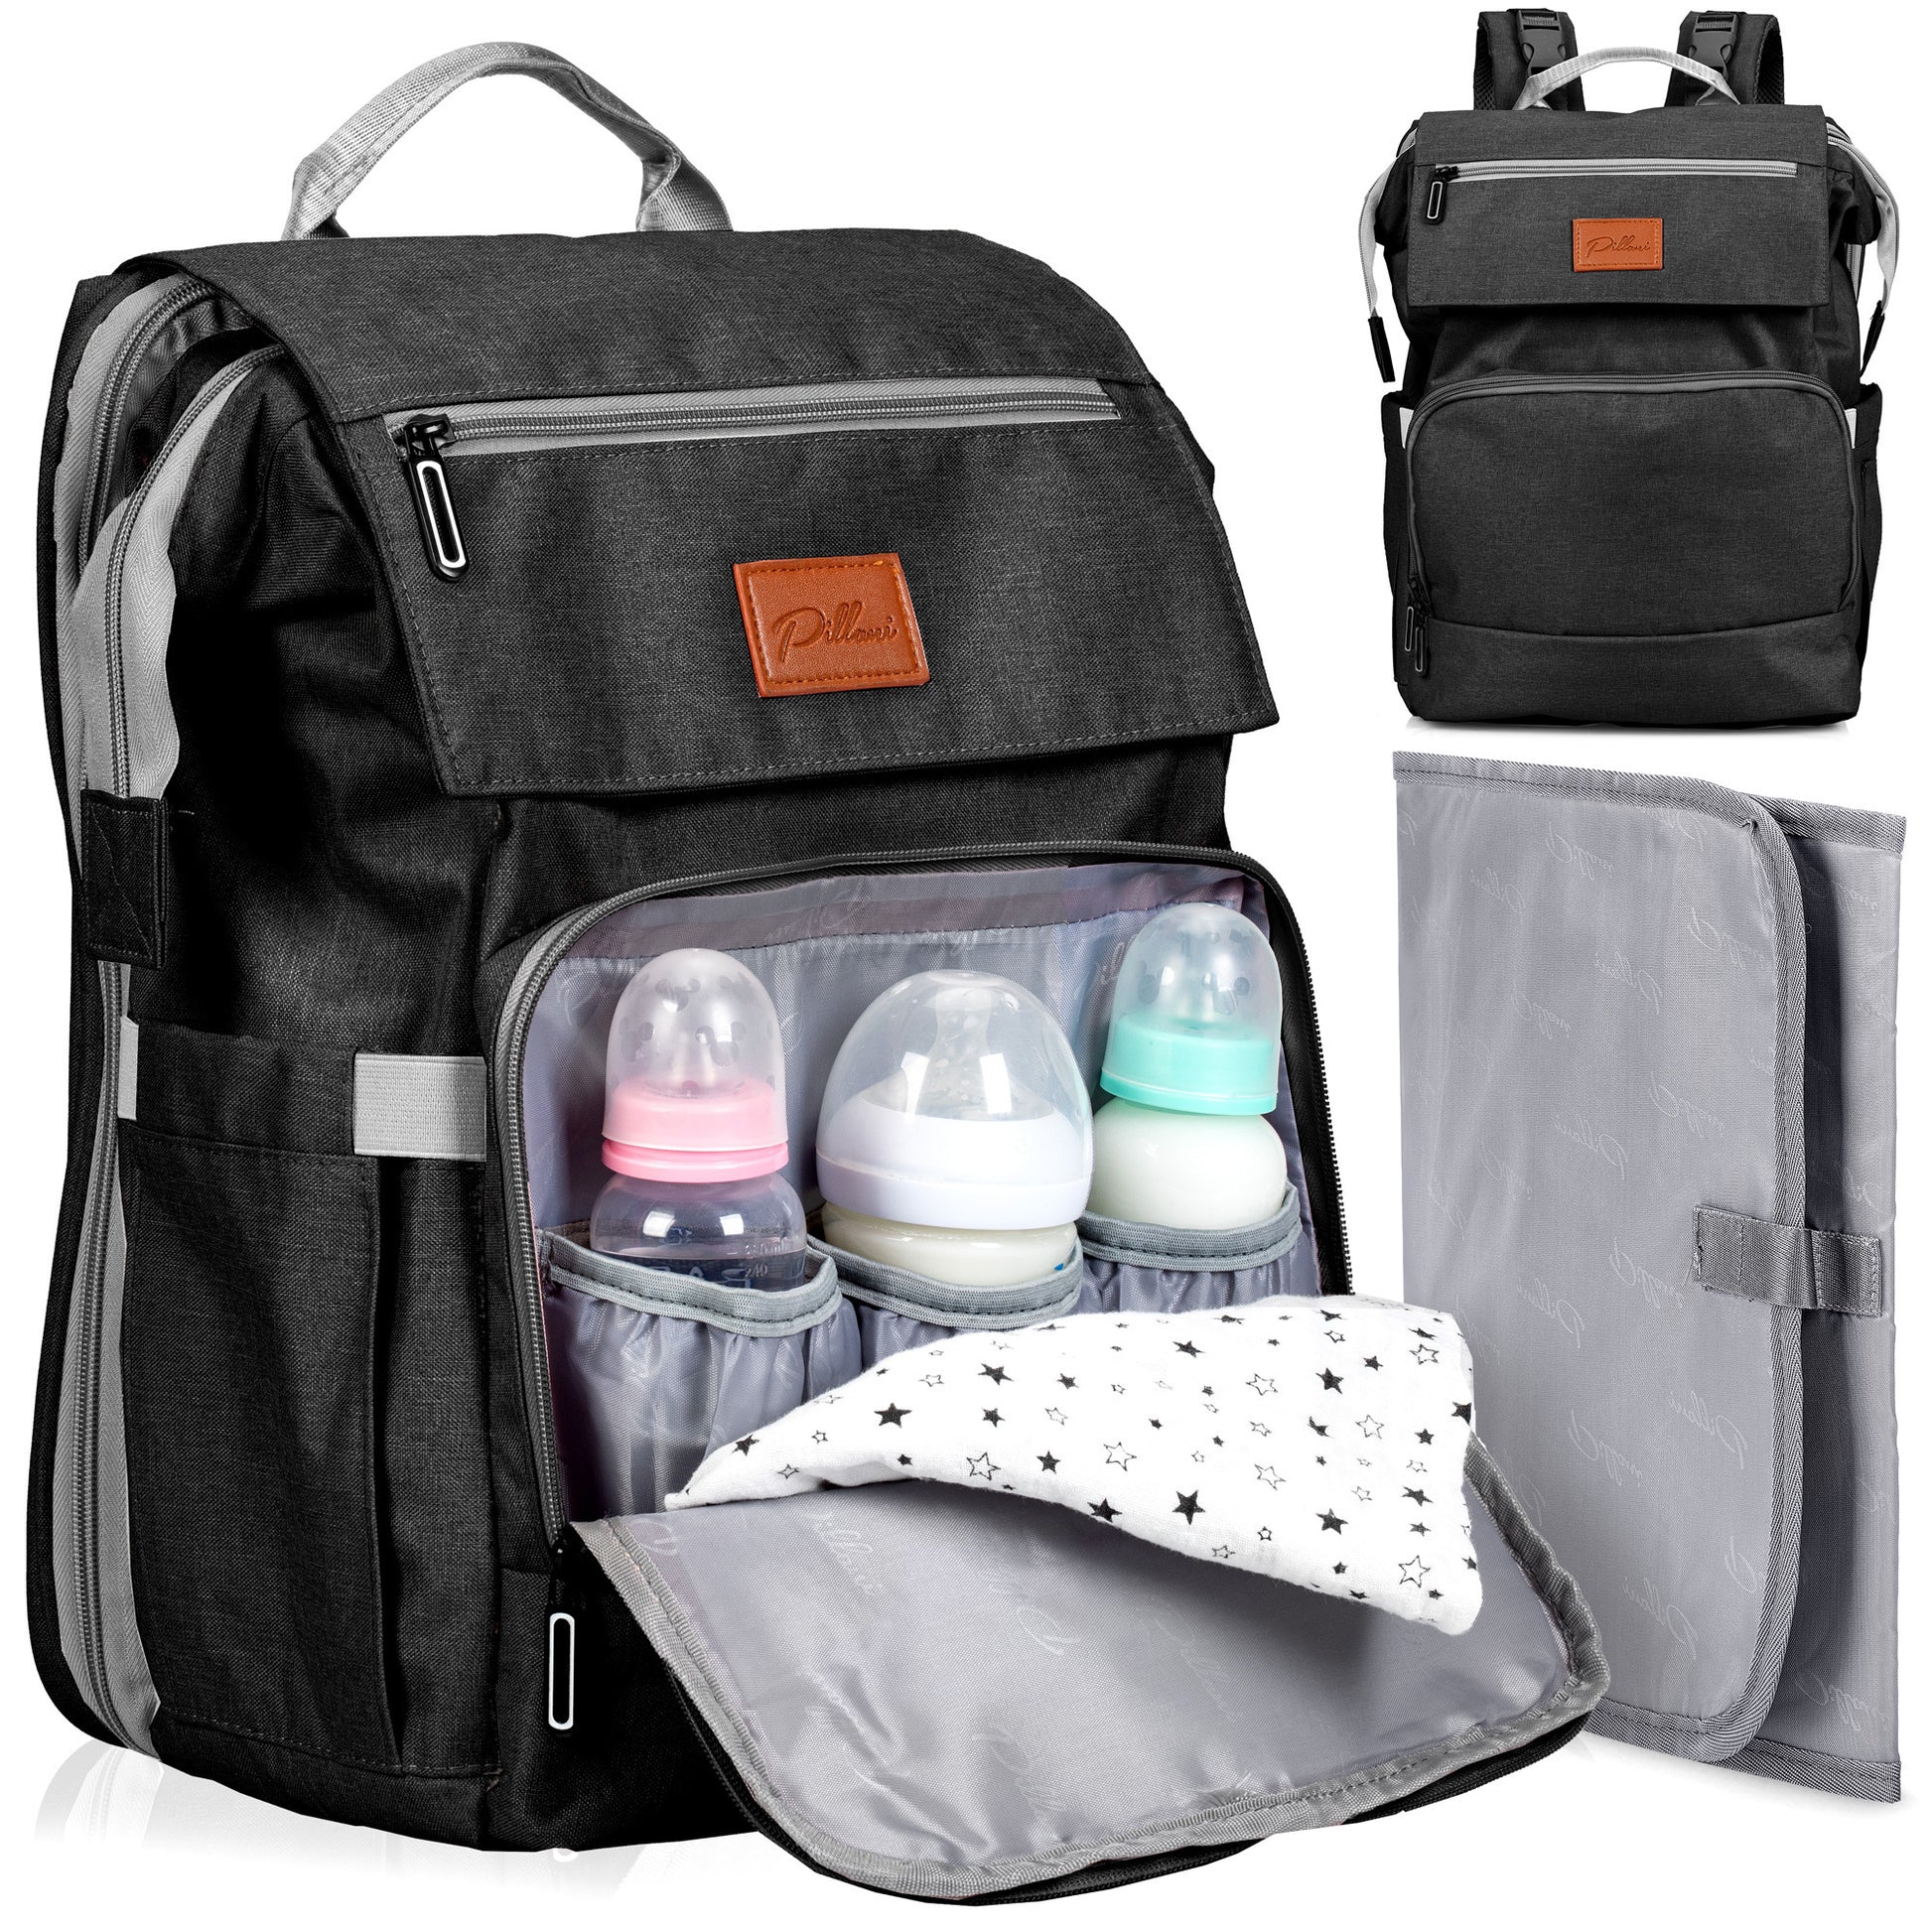 GOD BOY Diaper Bag 100% Premium Quality Multi-Function Travel Backpack for  Mother Bag Backpack Diaper Bag - Buy Baby Care Products in India